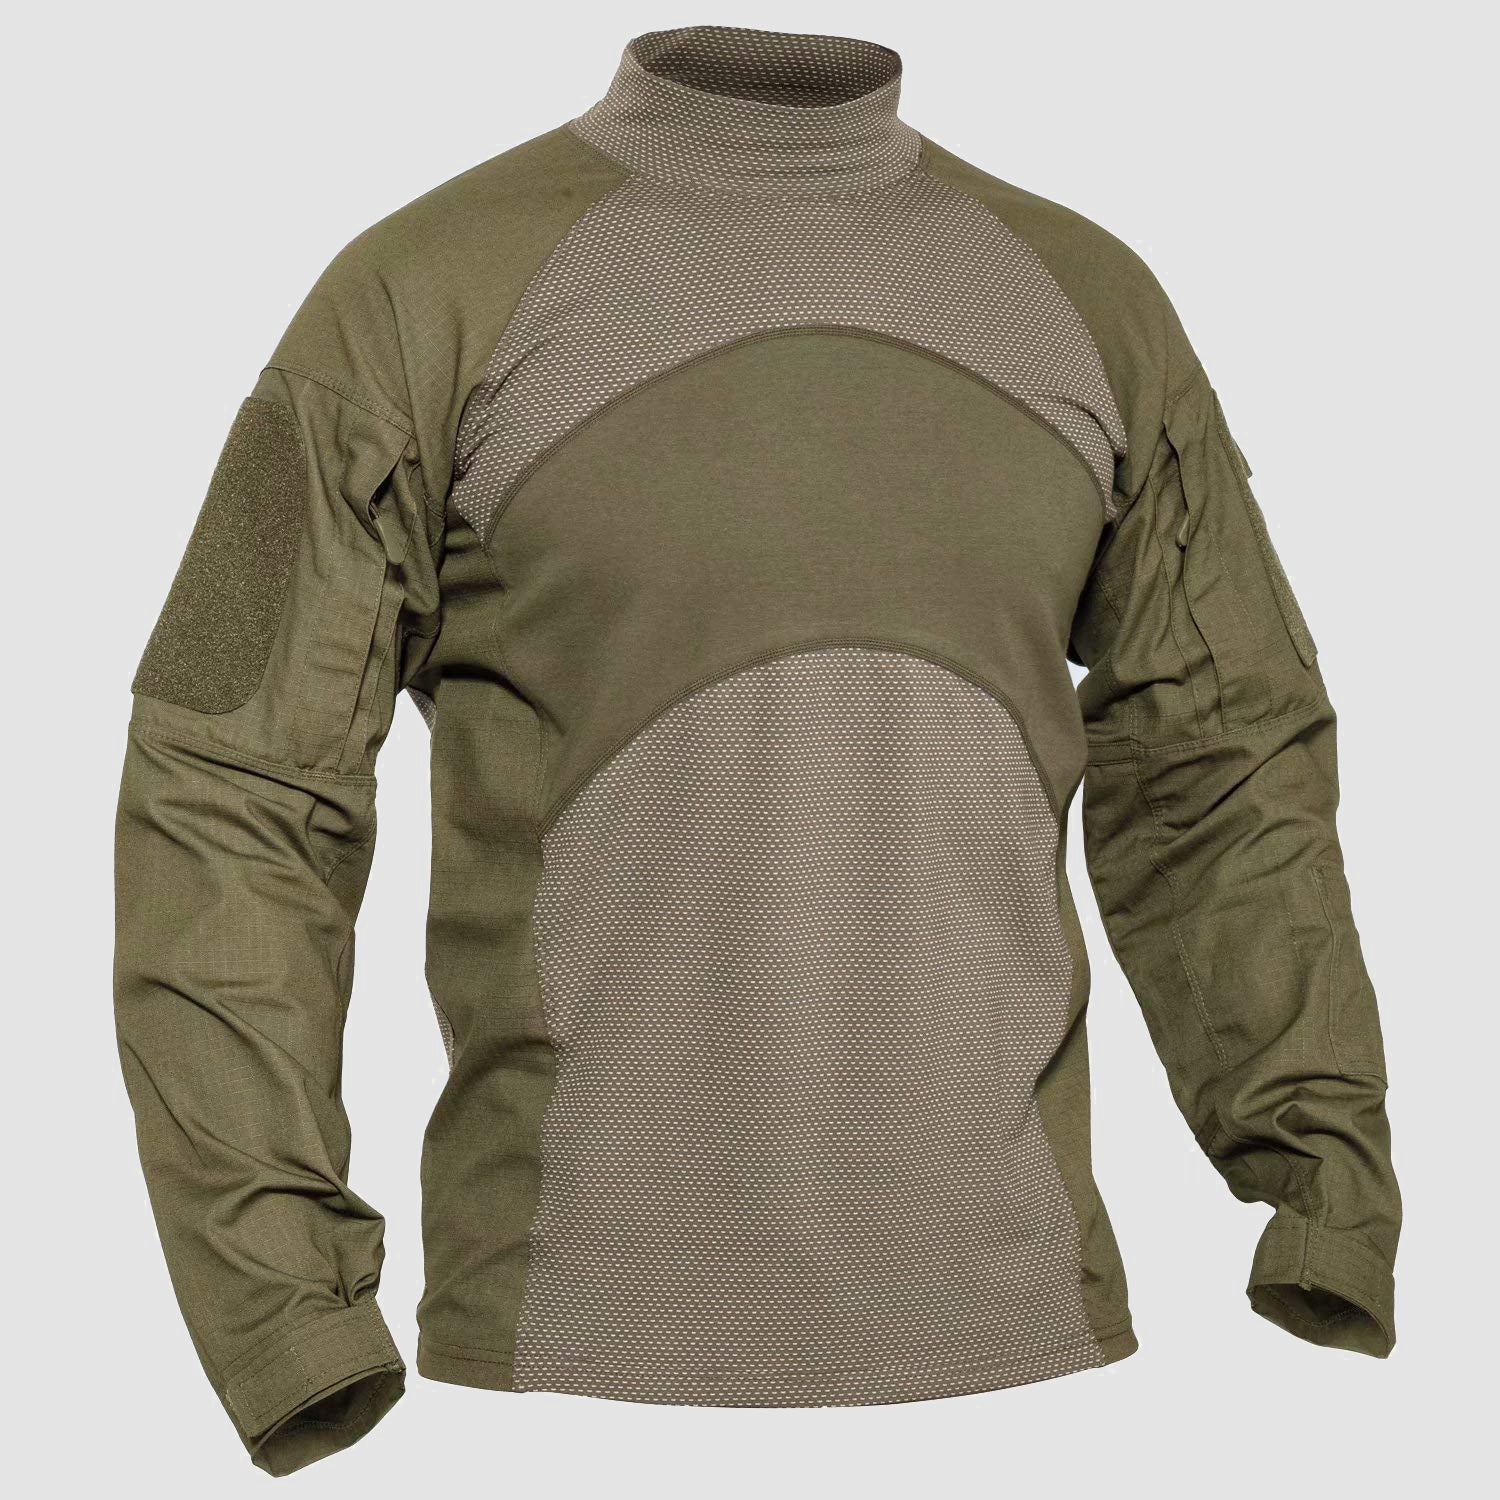 Men's Tactical Shirts Long Sleeve Military Combat Shirts with